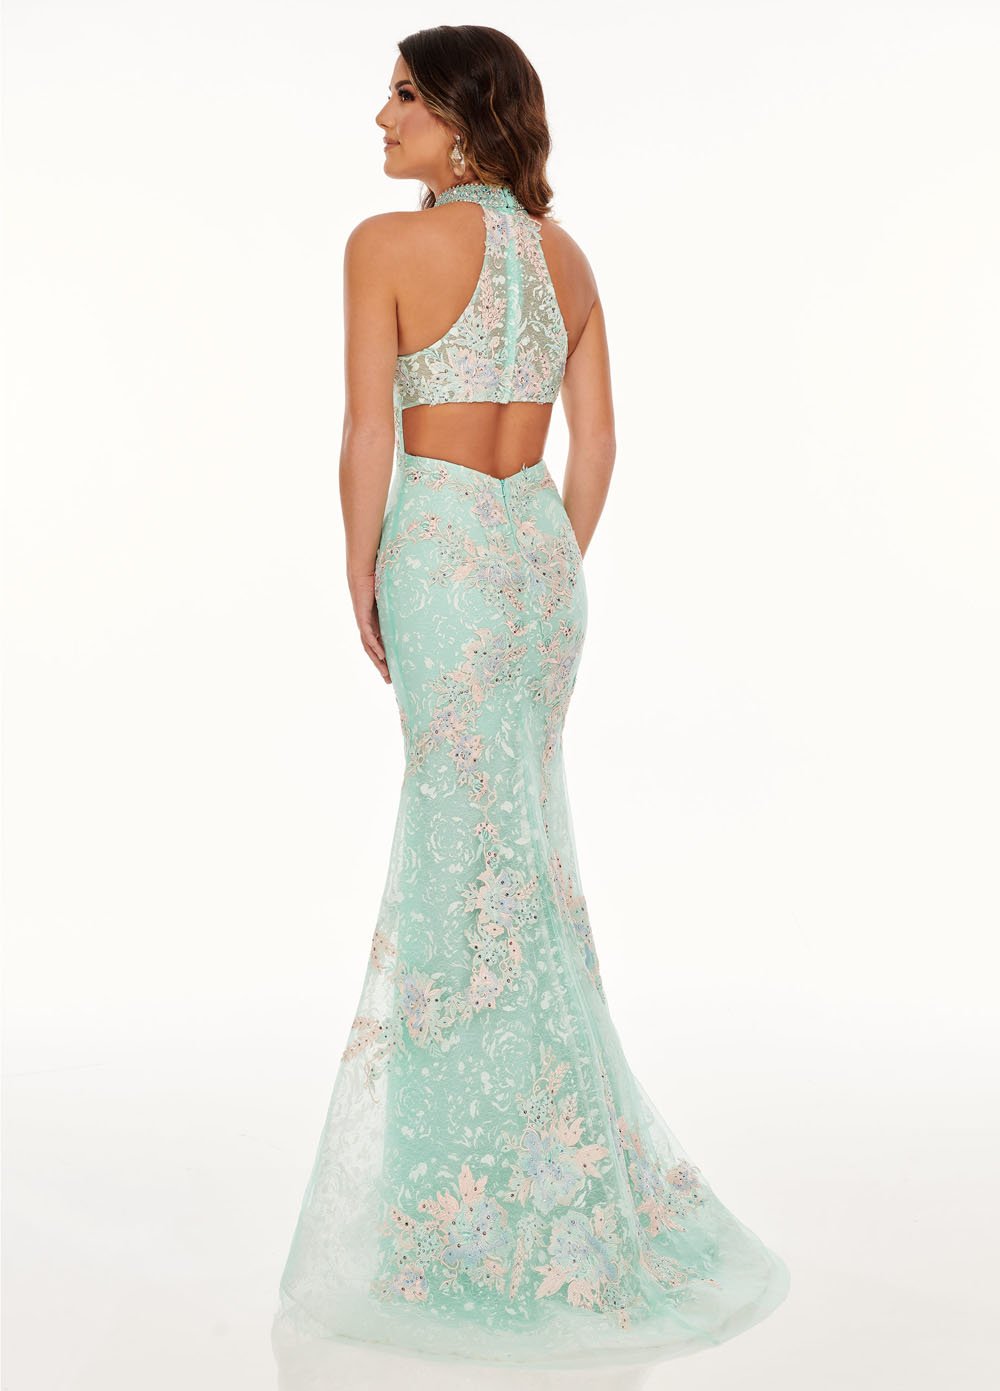 Rachel Allan 70066 dress images in these colors: Mint Multi, Pink Multi.